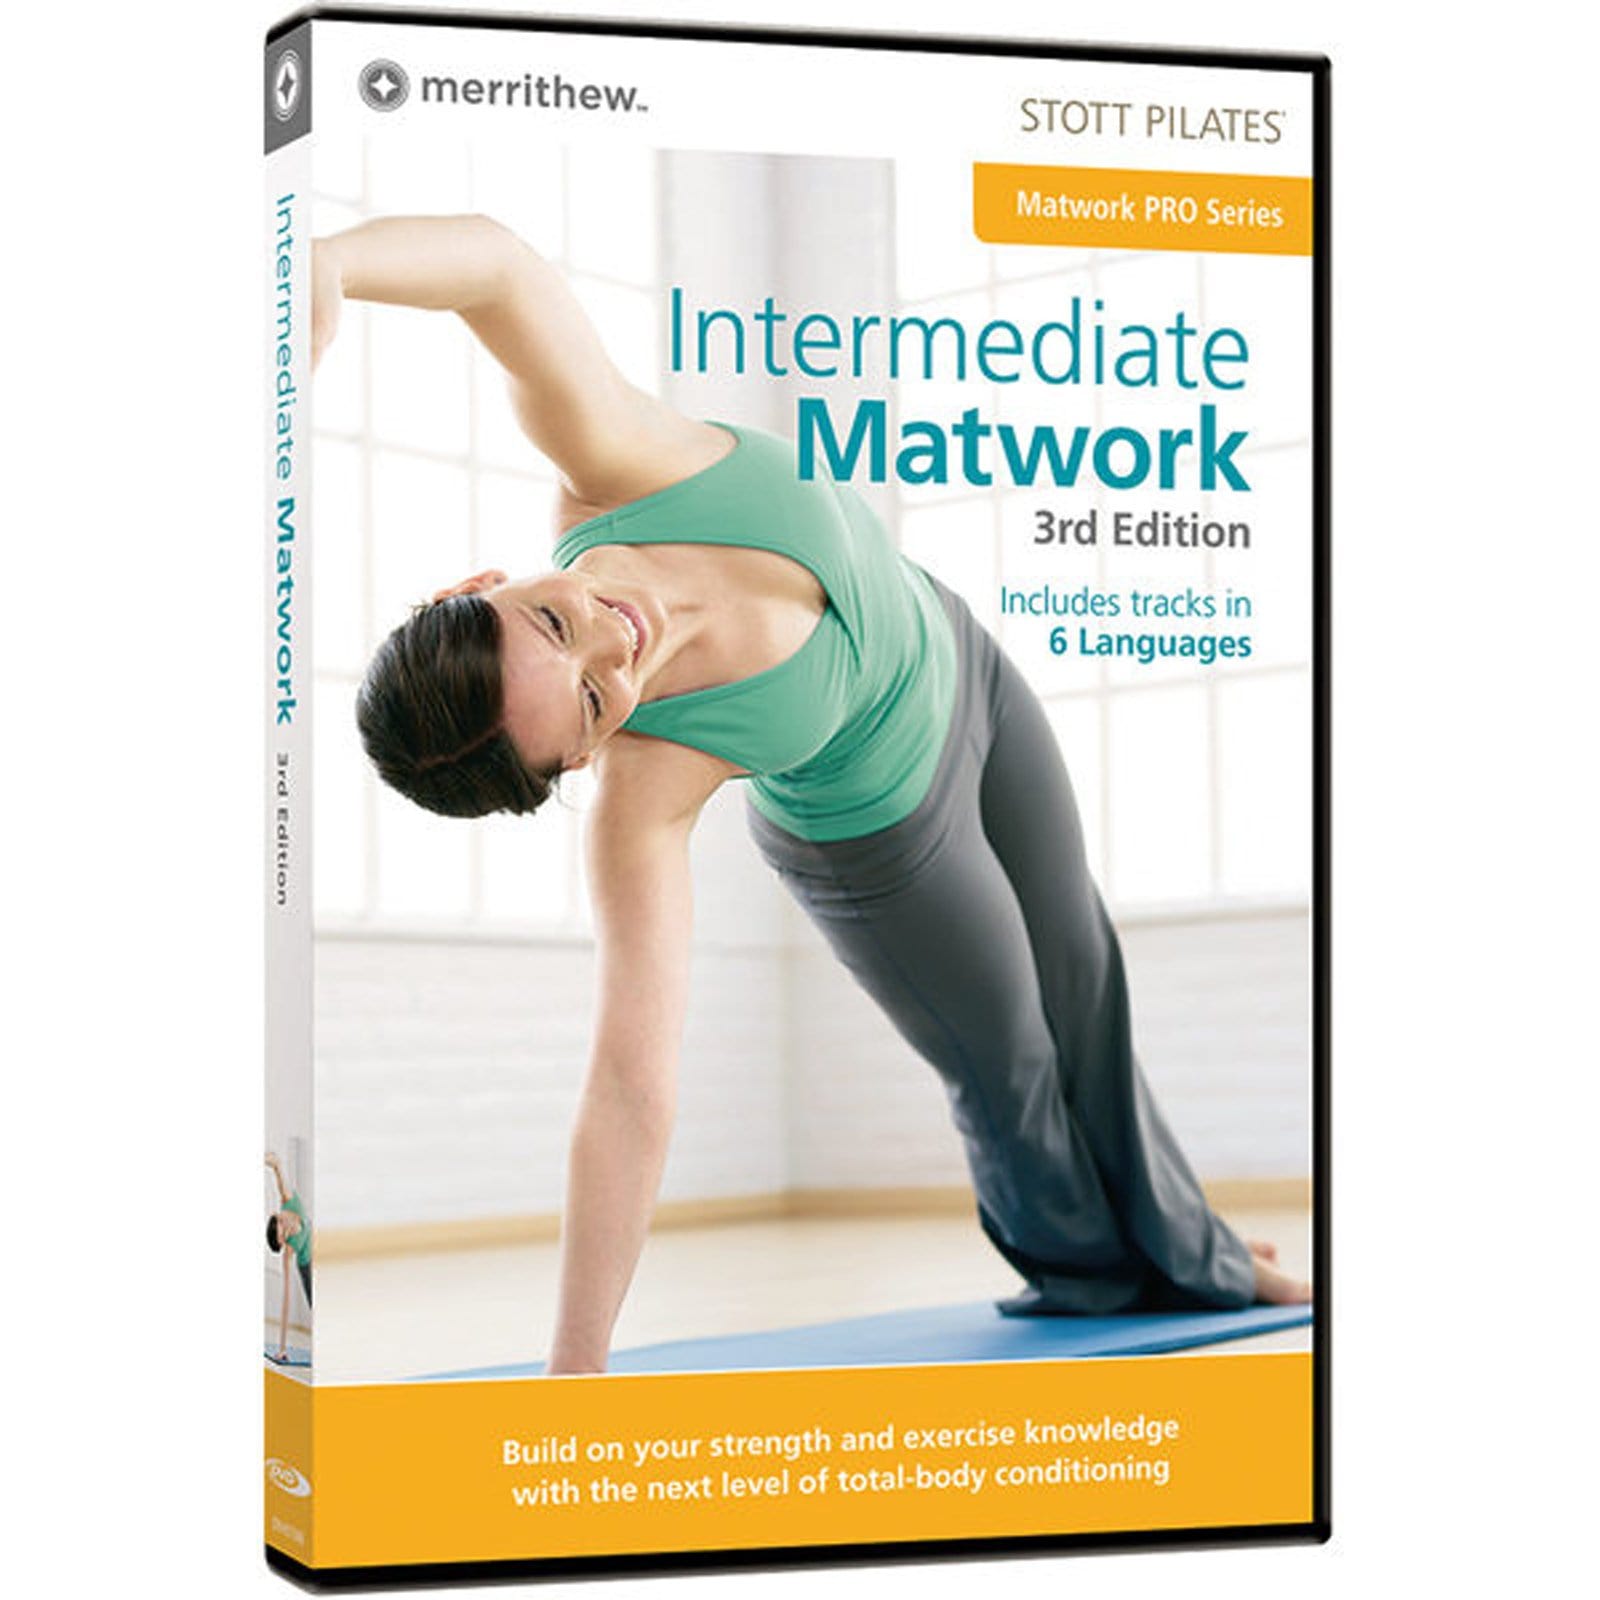 What Equipment is Needed for Online Pilates at Home? - MatWorkz